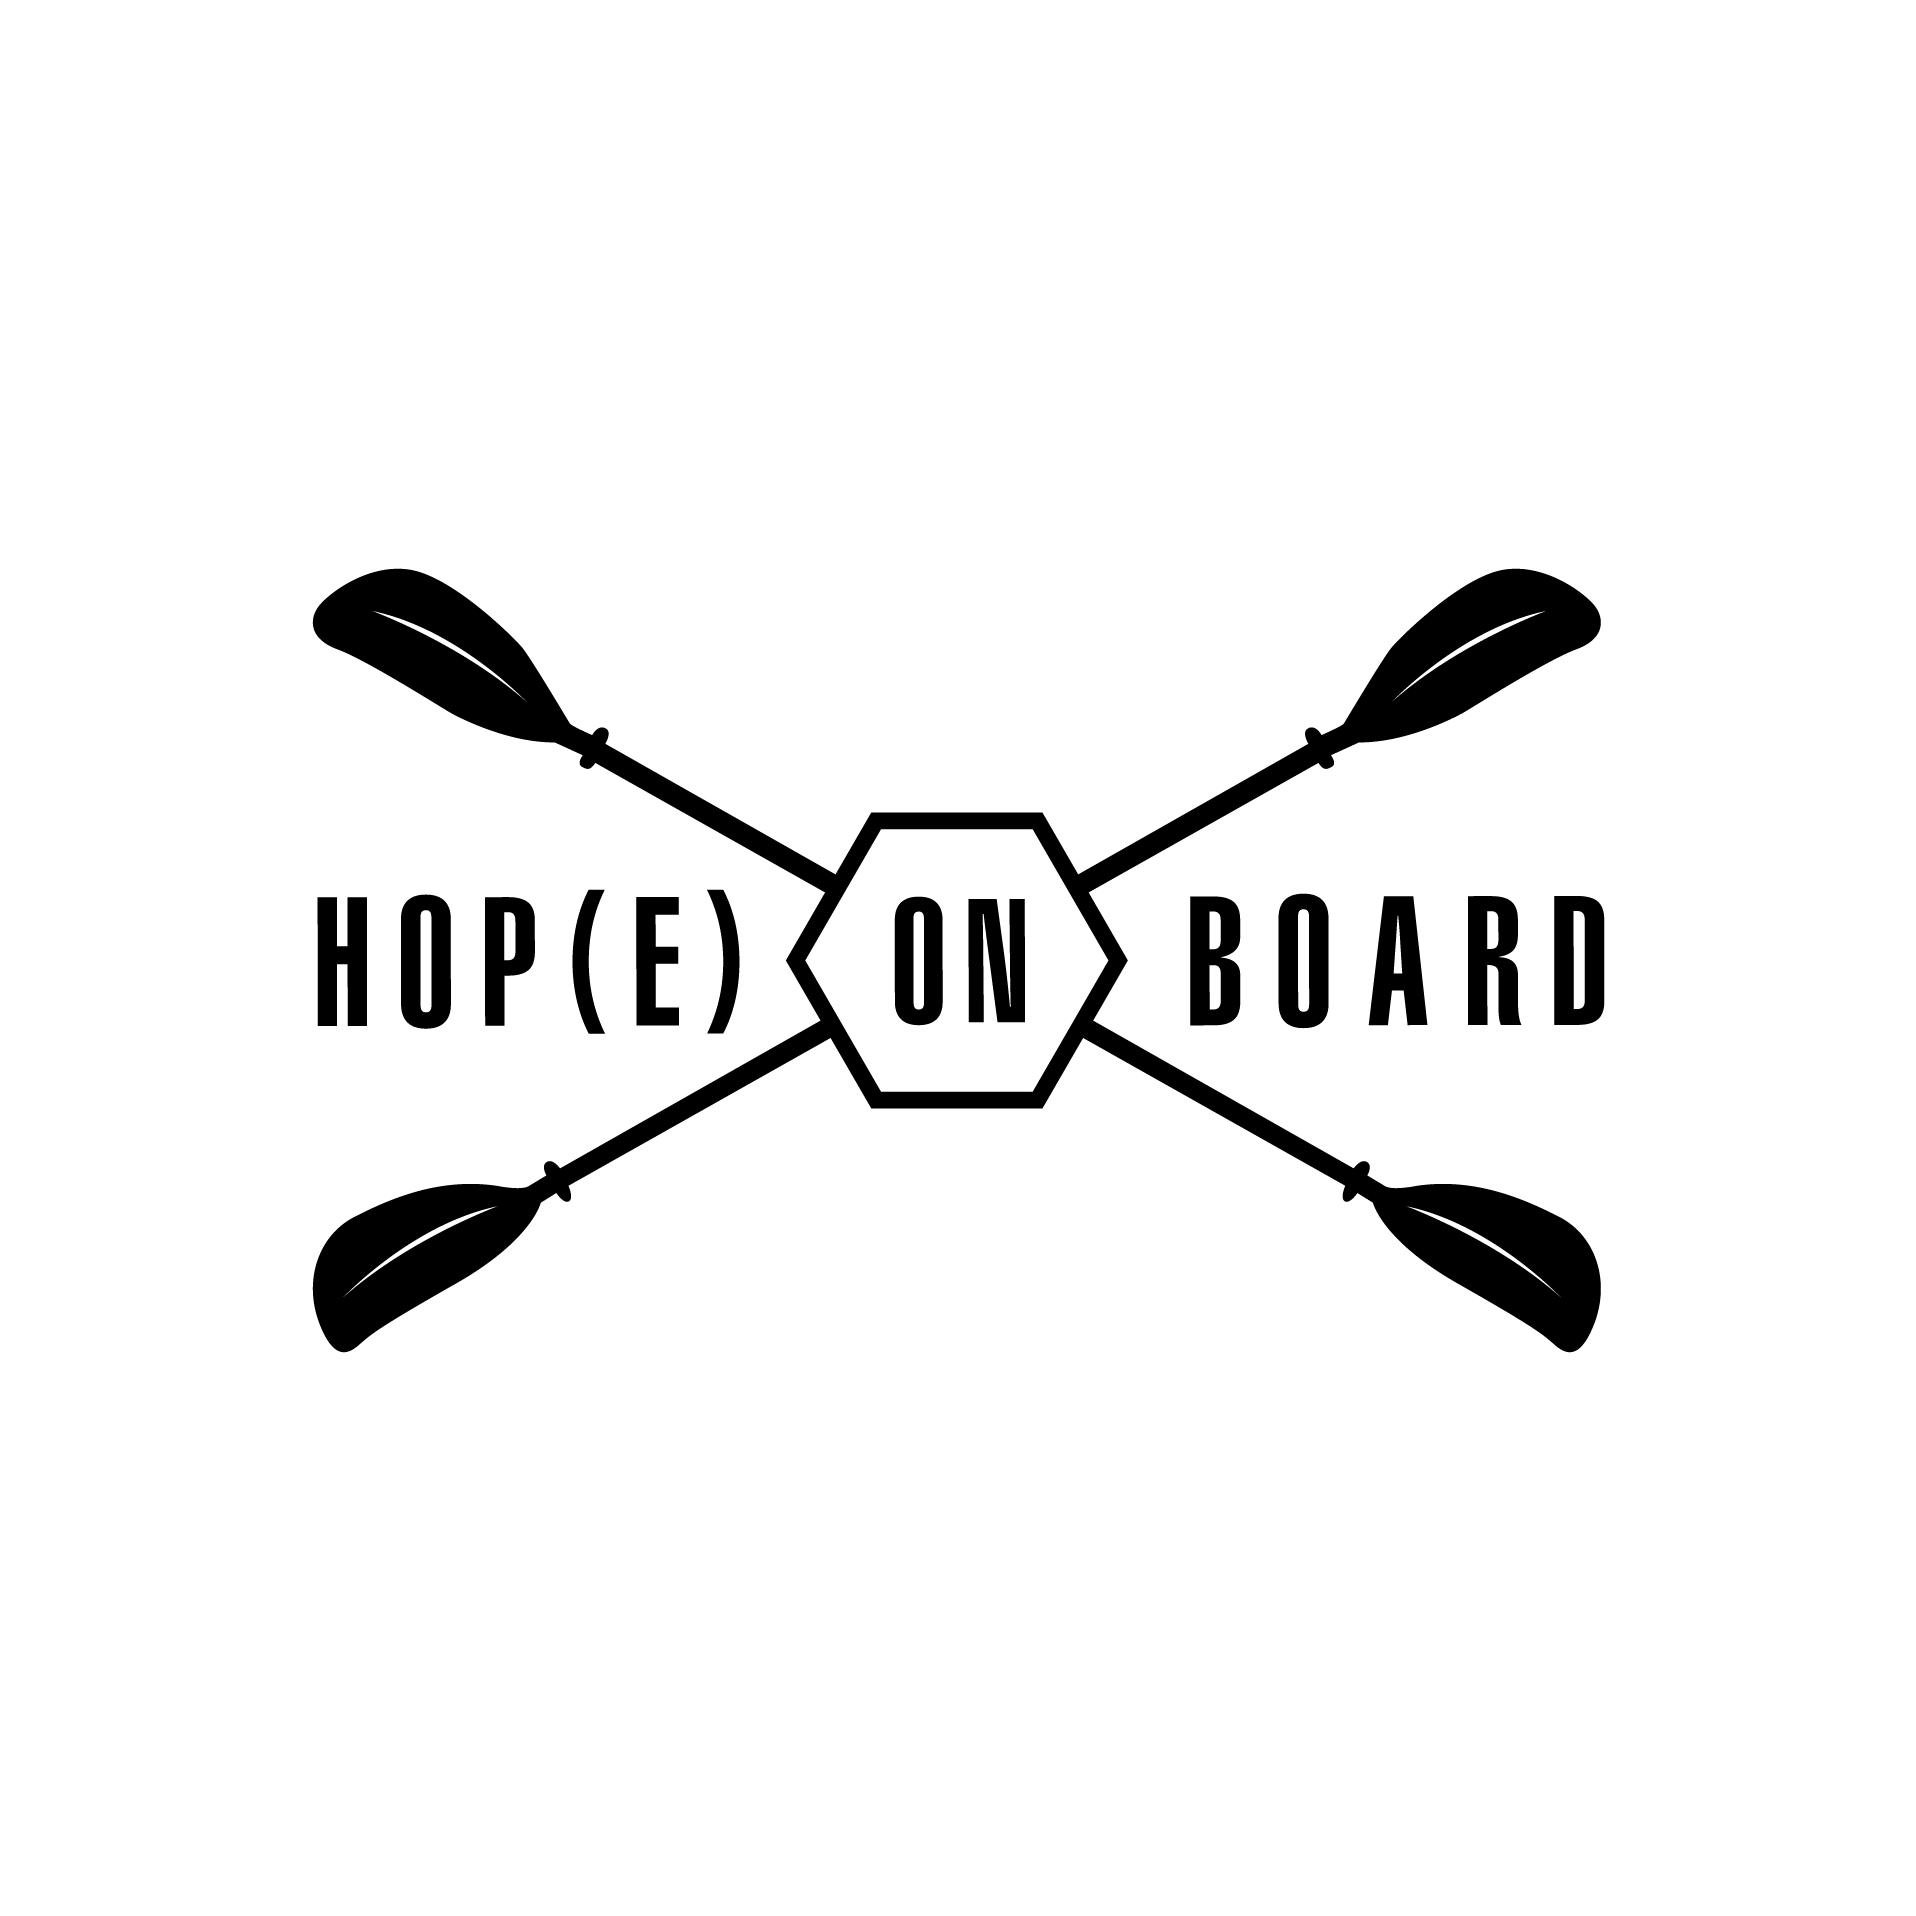 HopeOnBoard is a border to border kayak trip around the coast of South Africa! The launch date is end November 2014.